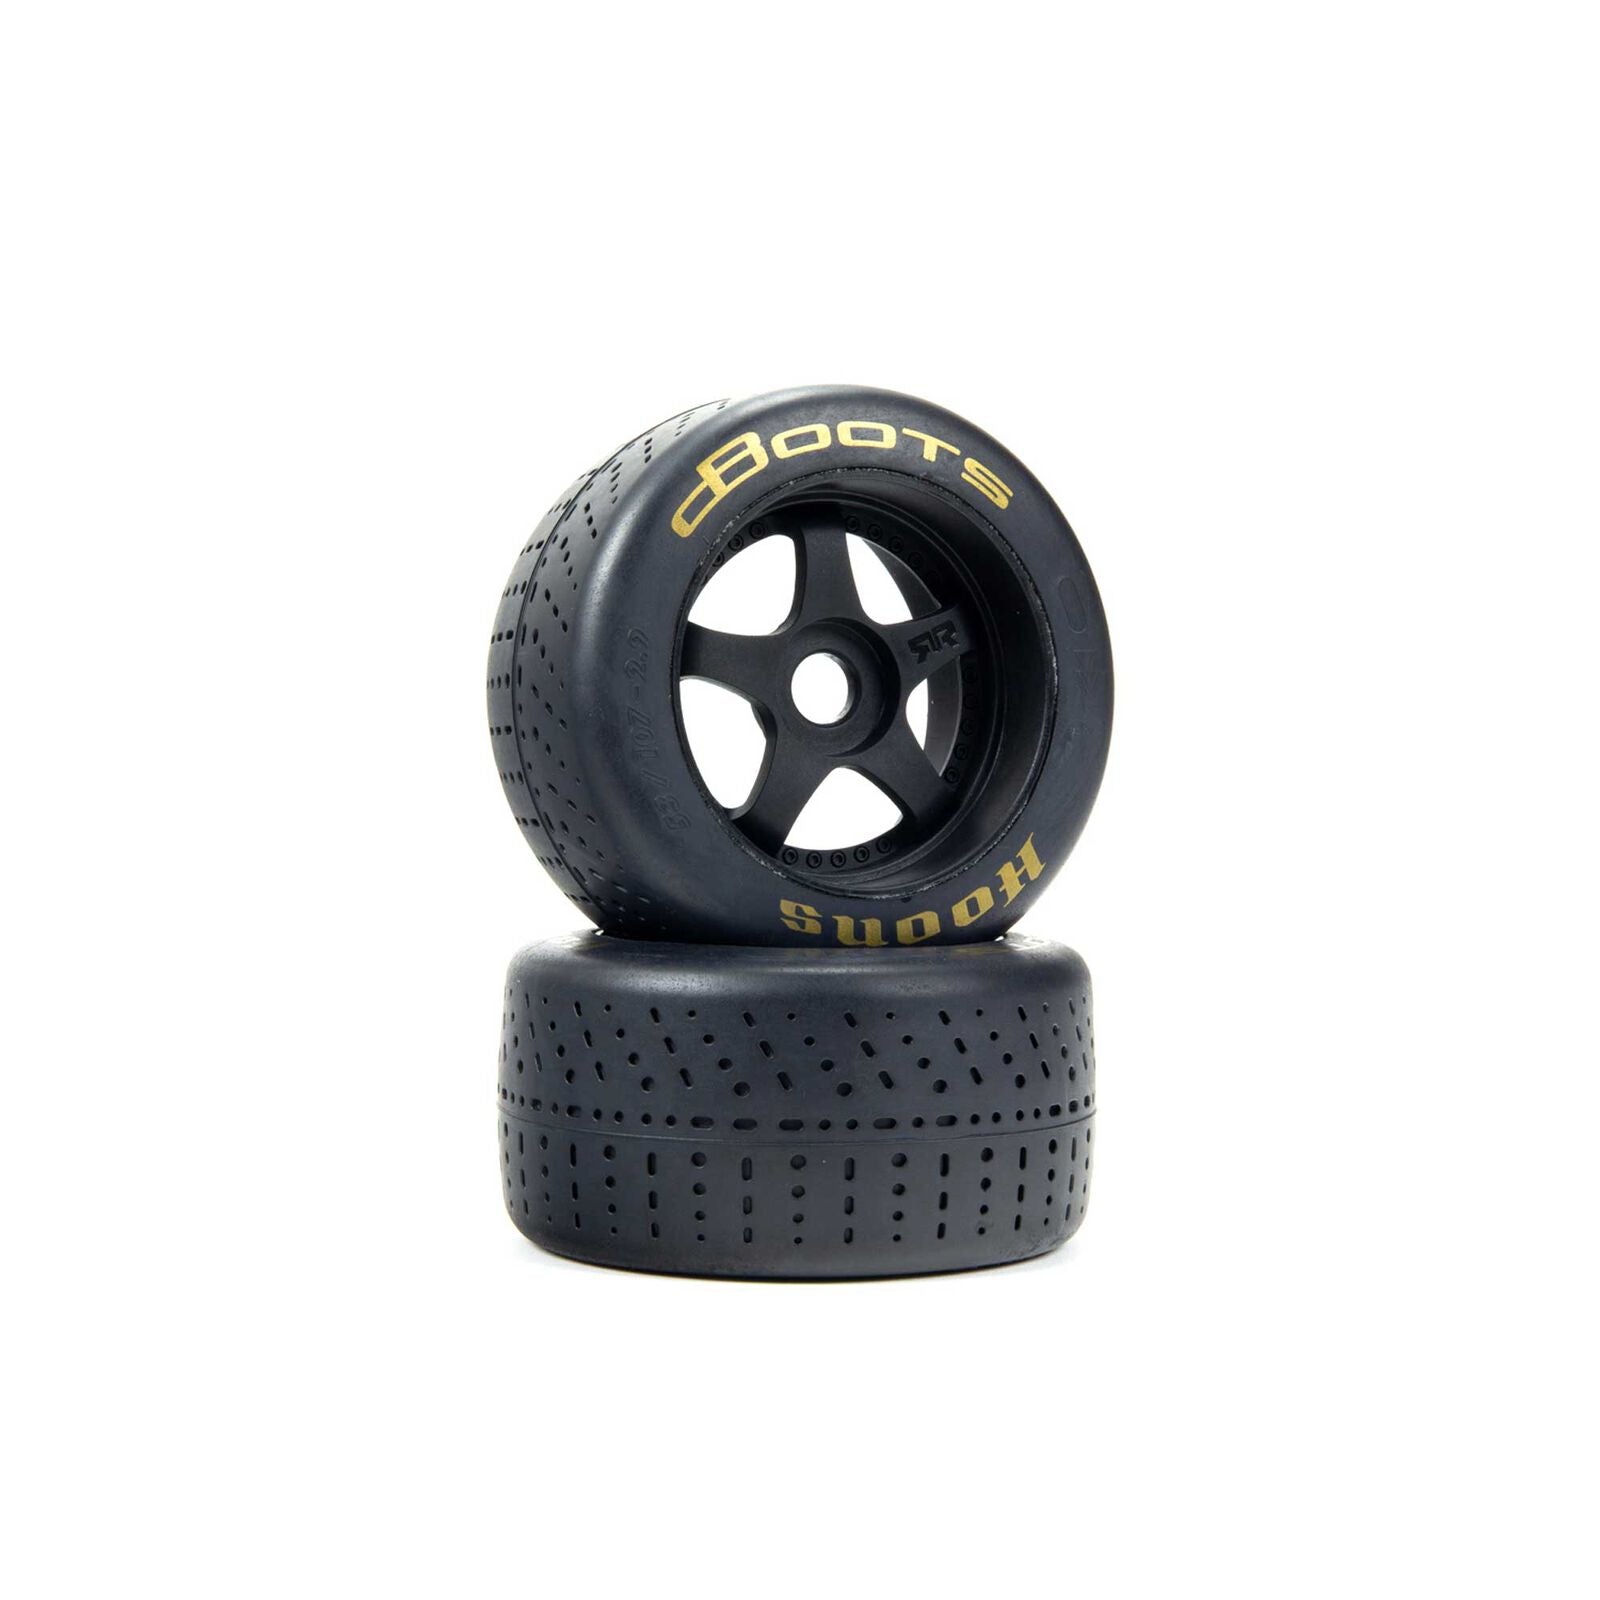 ARRMA ARA550085 1/7 dBoots Hoons Rear 107 Gold Pre-Mounted Belted Tires, 17mm Hex